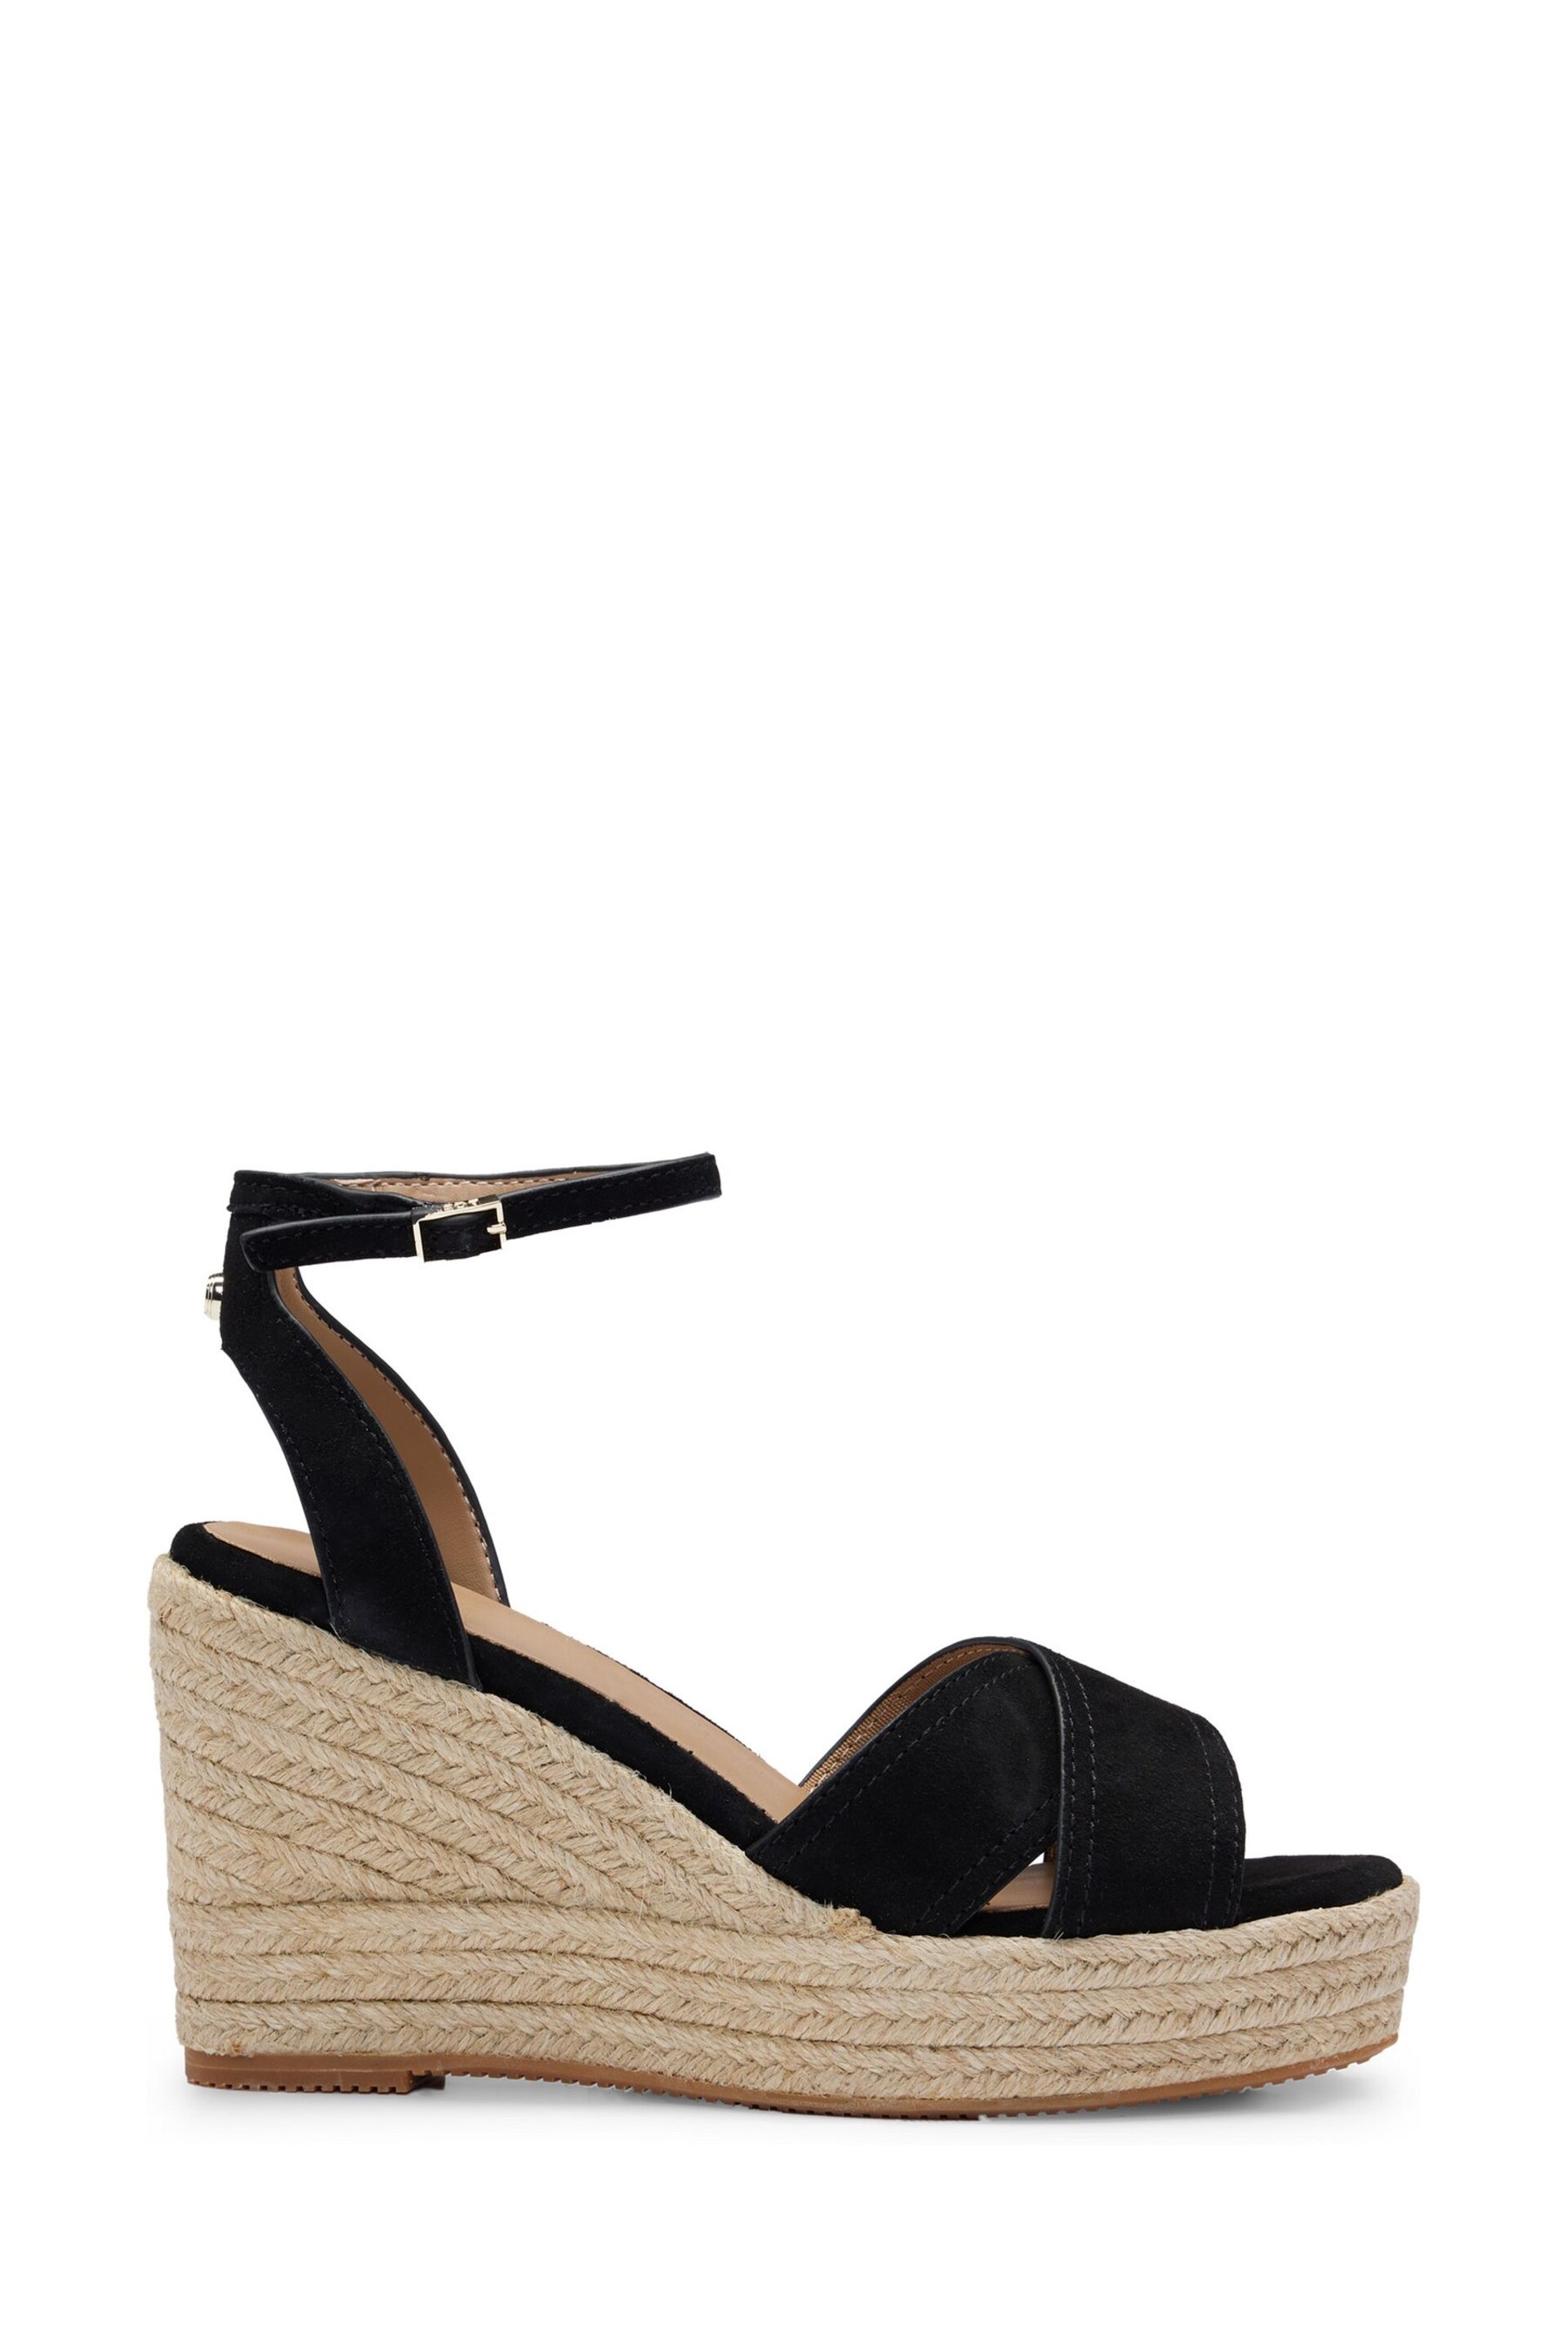 BOSS Black Suede Wedge Sandals With Ankle Strap - Image 1 of 4